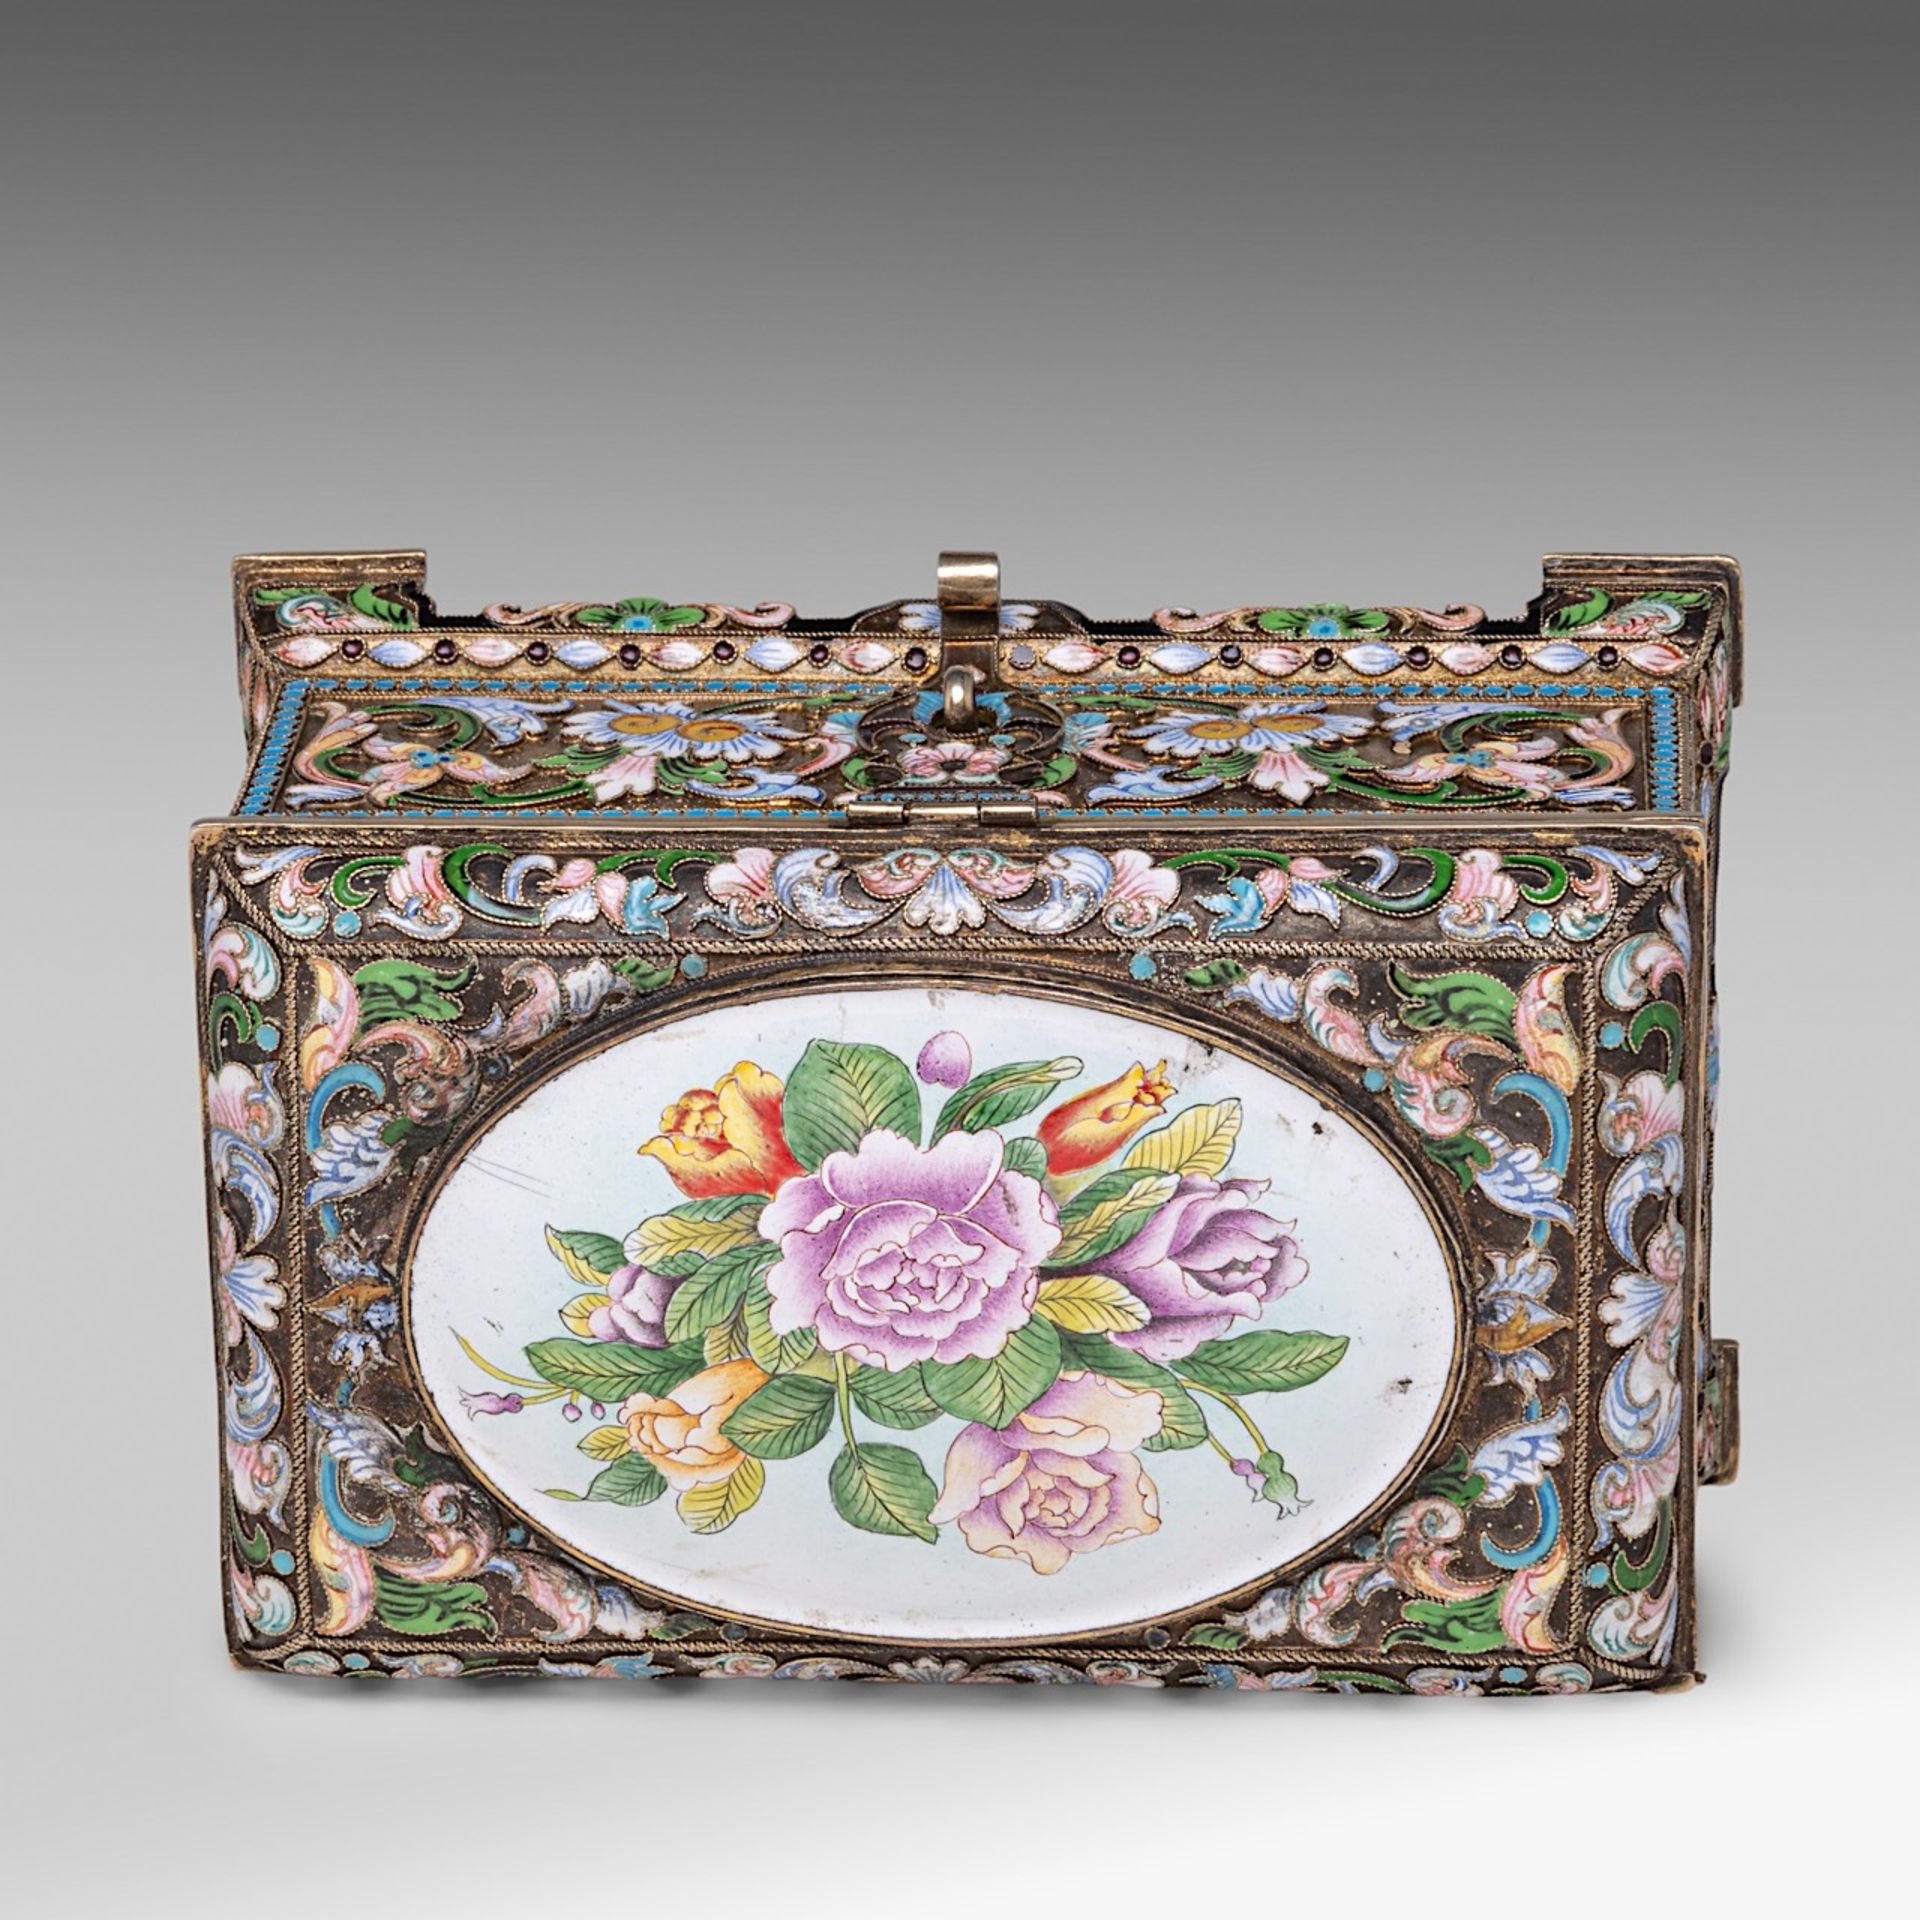 A Russian silver and enamel floral decorated jewellery box, hallmarked 84 Zolotniki, H 8 - 15 - 10 c - Bild 6 aus 9